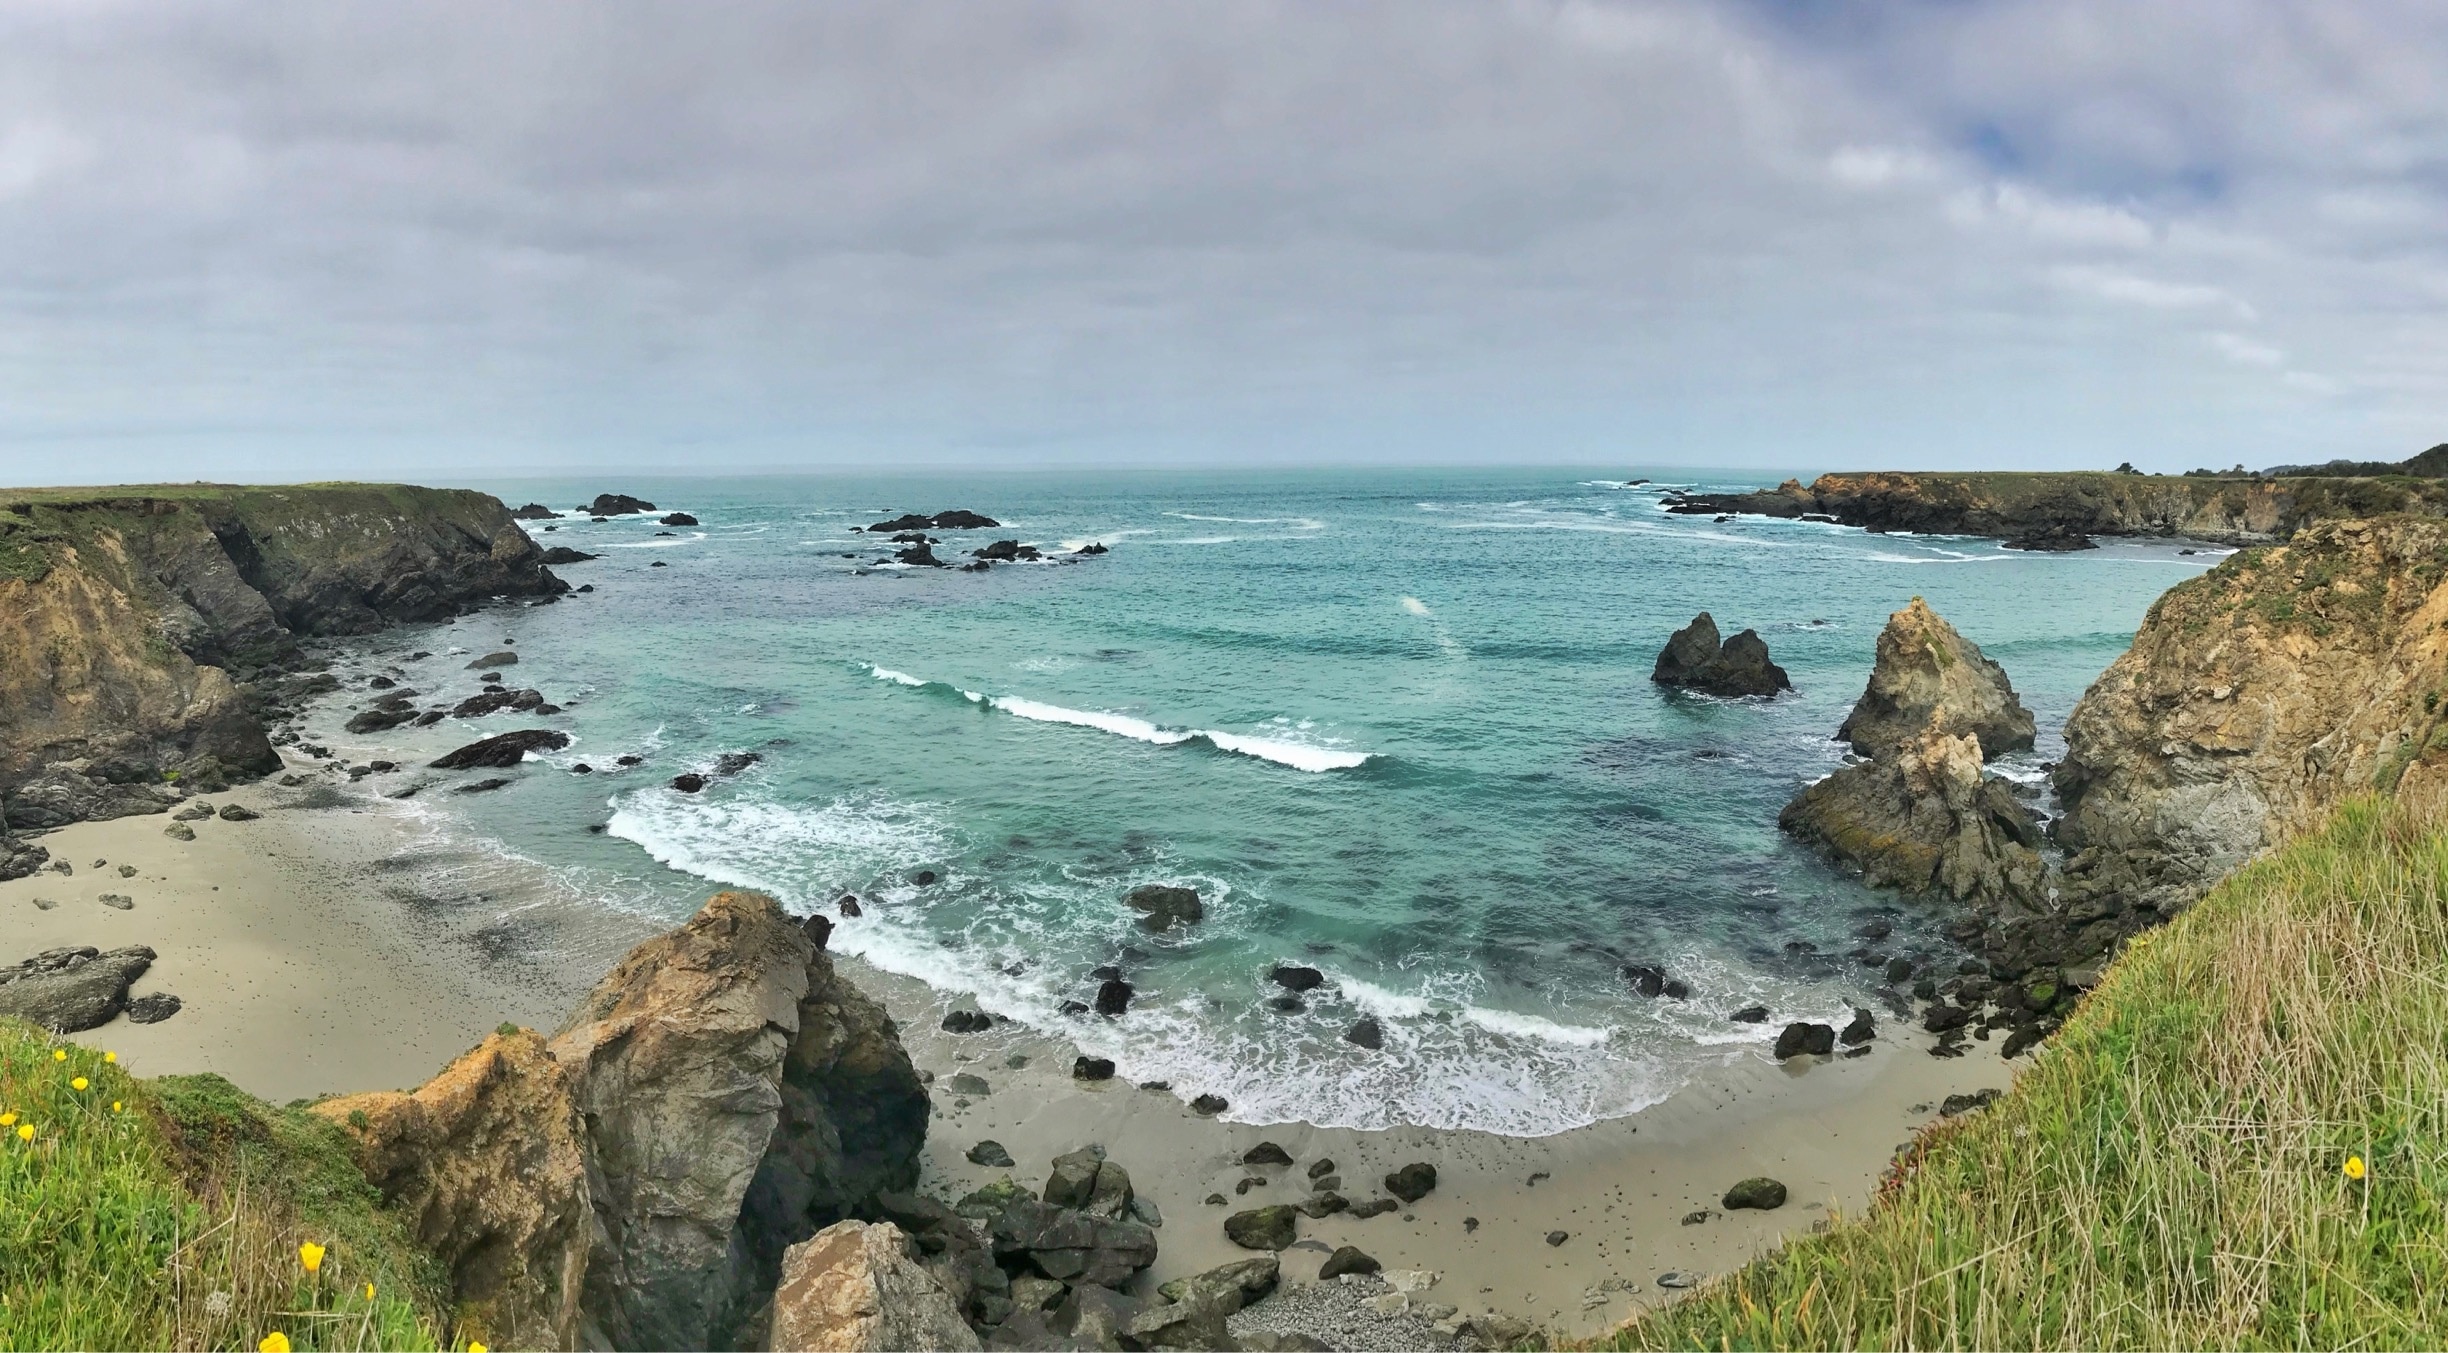 One of the 2 beaches you can spot on this short walk in Jug Handle. Easily some of the best views I’ve seen on the north coast of California! #fortbragg